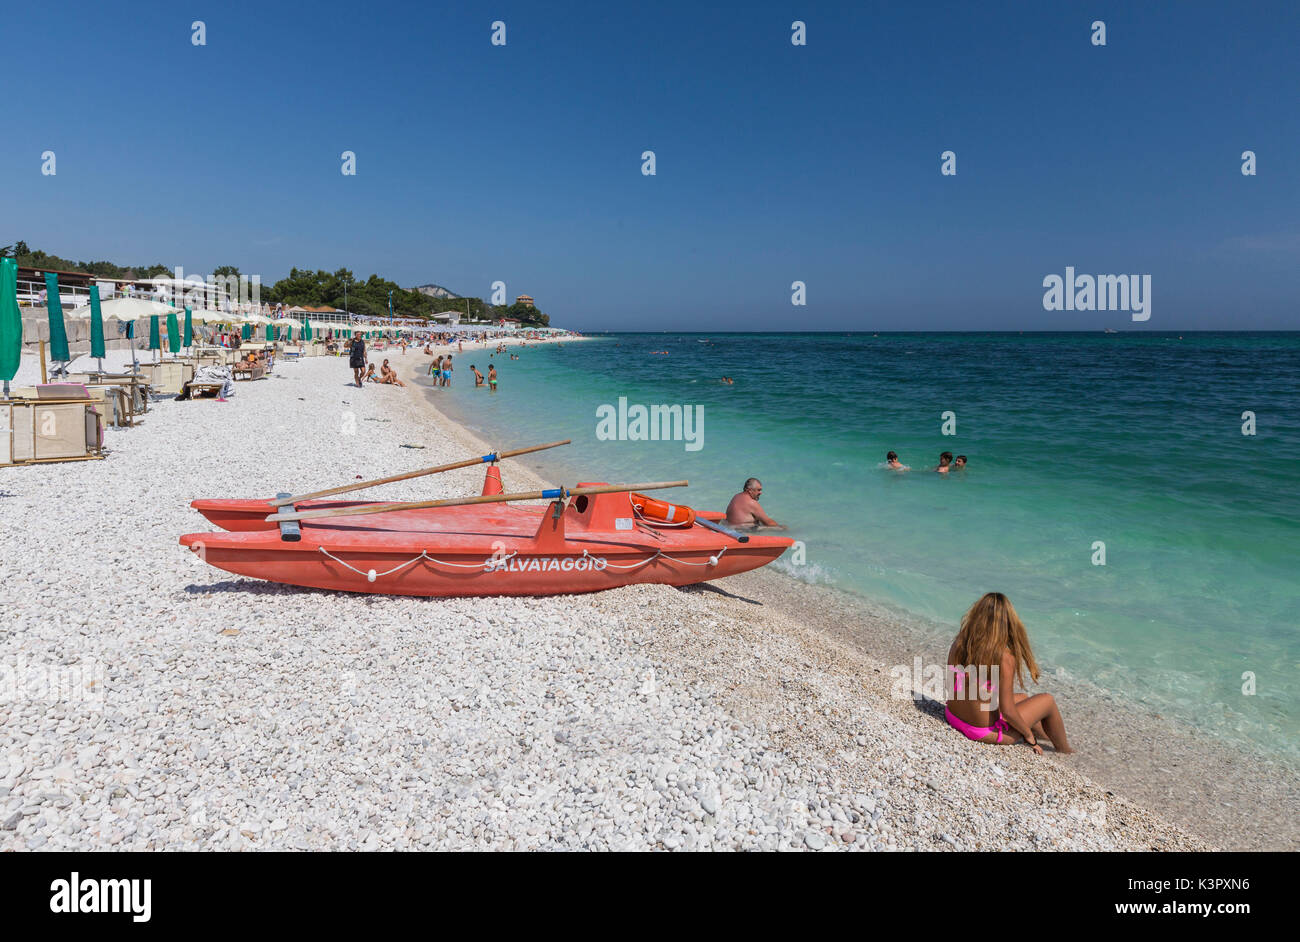 Tourists on the beach framed by the turquoise sea province of Ancona Conero Riviera Marche Italy Europe Stock Photo